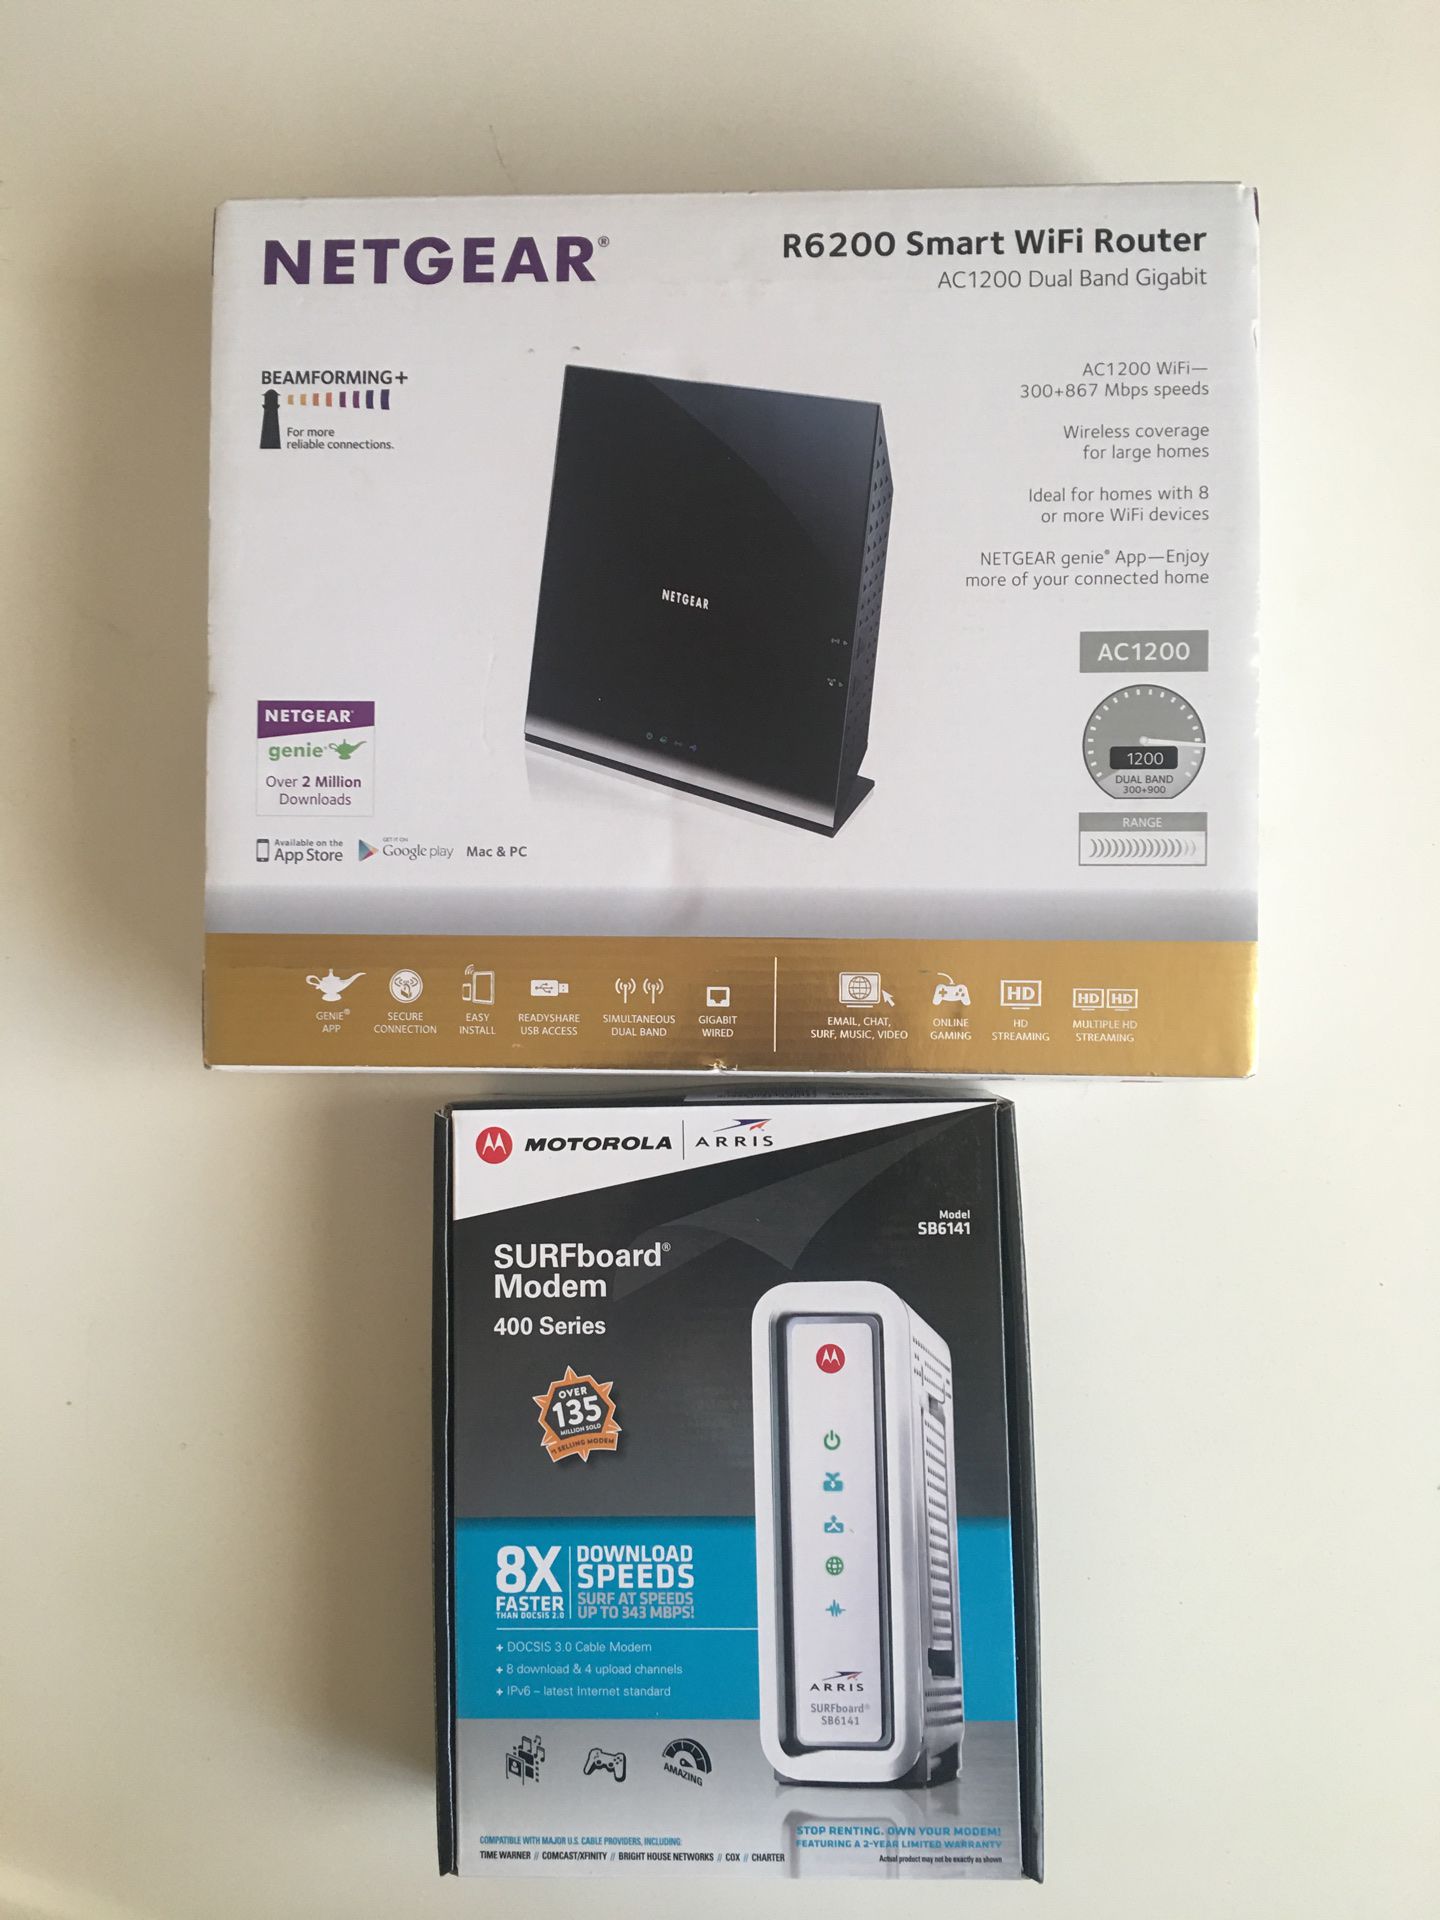 Cable modem and smart wifi router package